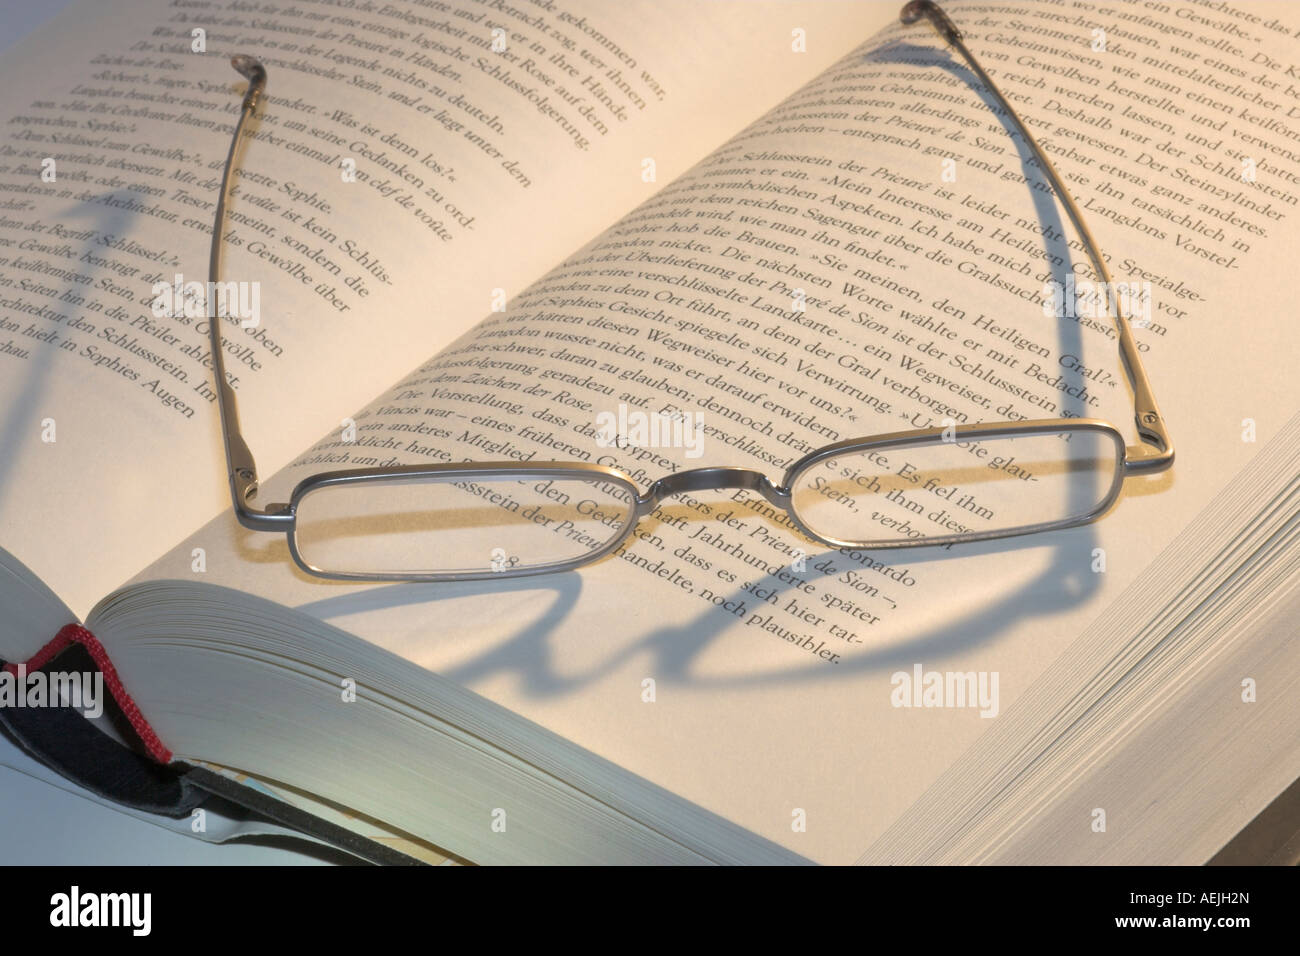 Reading glasses lying on an open book Stock Photo